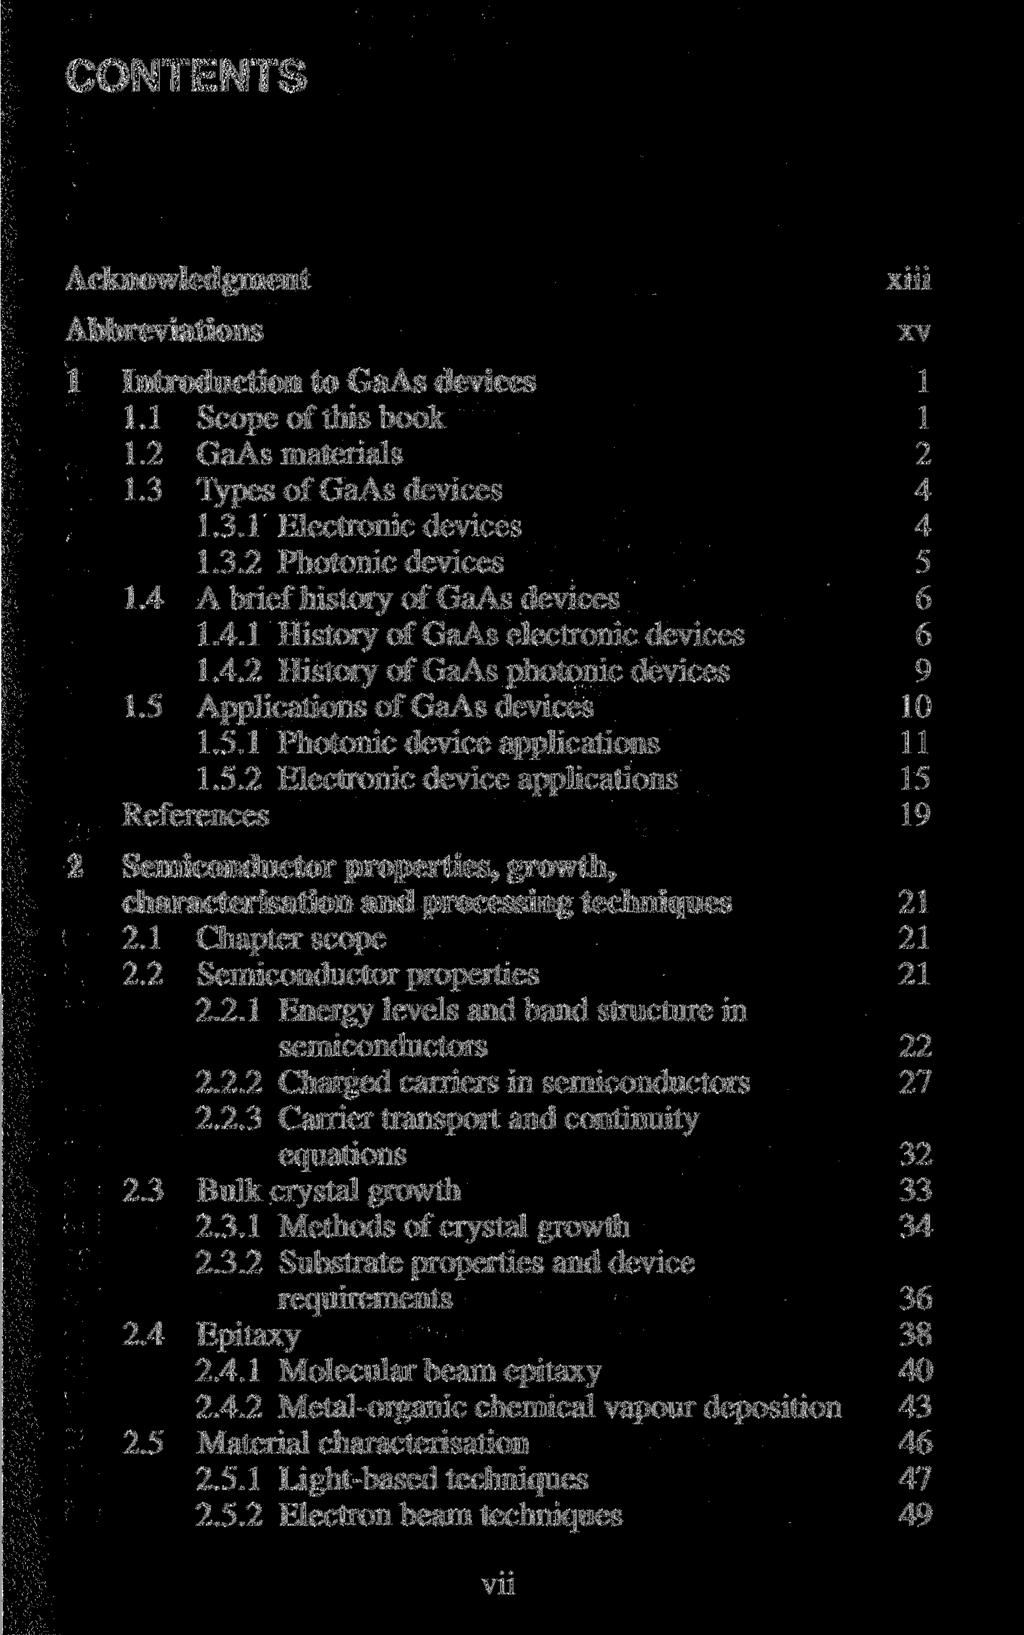 CONTENTS Acknowledgment Abbreviations xiii 1 Introduction to GaAs devices 1 1.1 Scope of this book 1 1.2 GaAs materials 2 1.3 Types of GaAs devices 4 1.3.1 Electronic devices 4 1.3.2 Photonic devices 5 1.